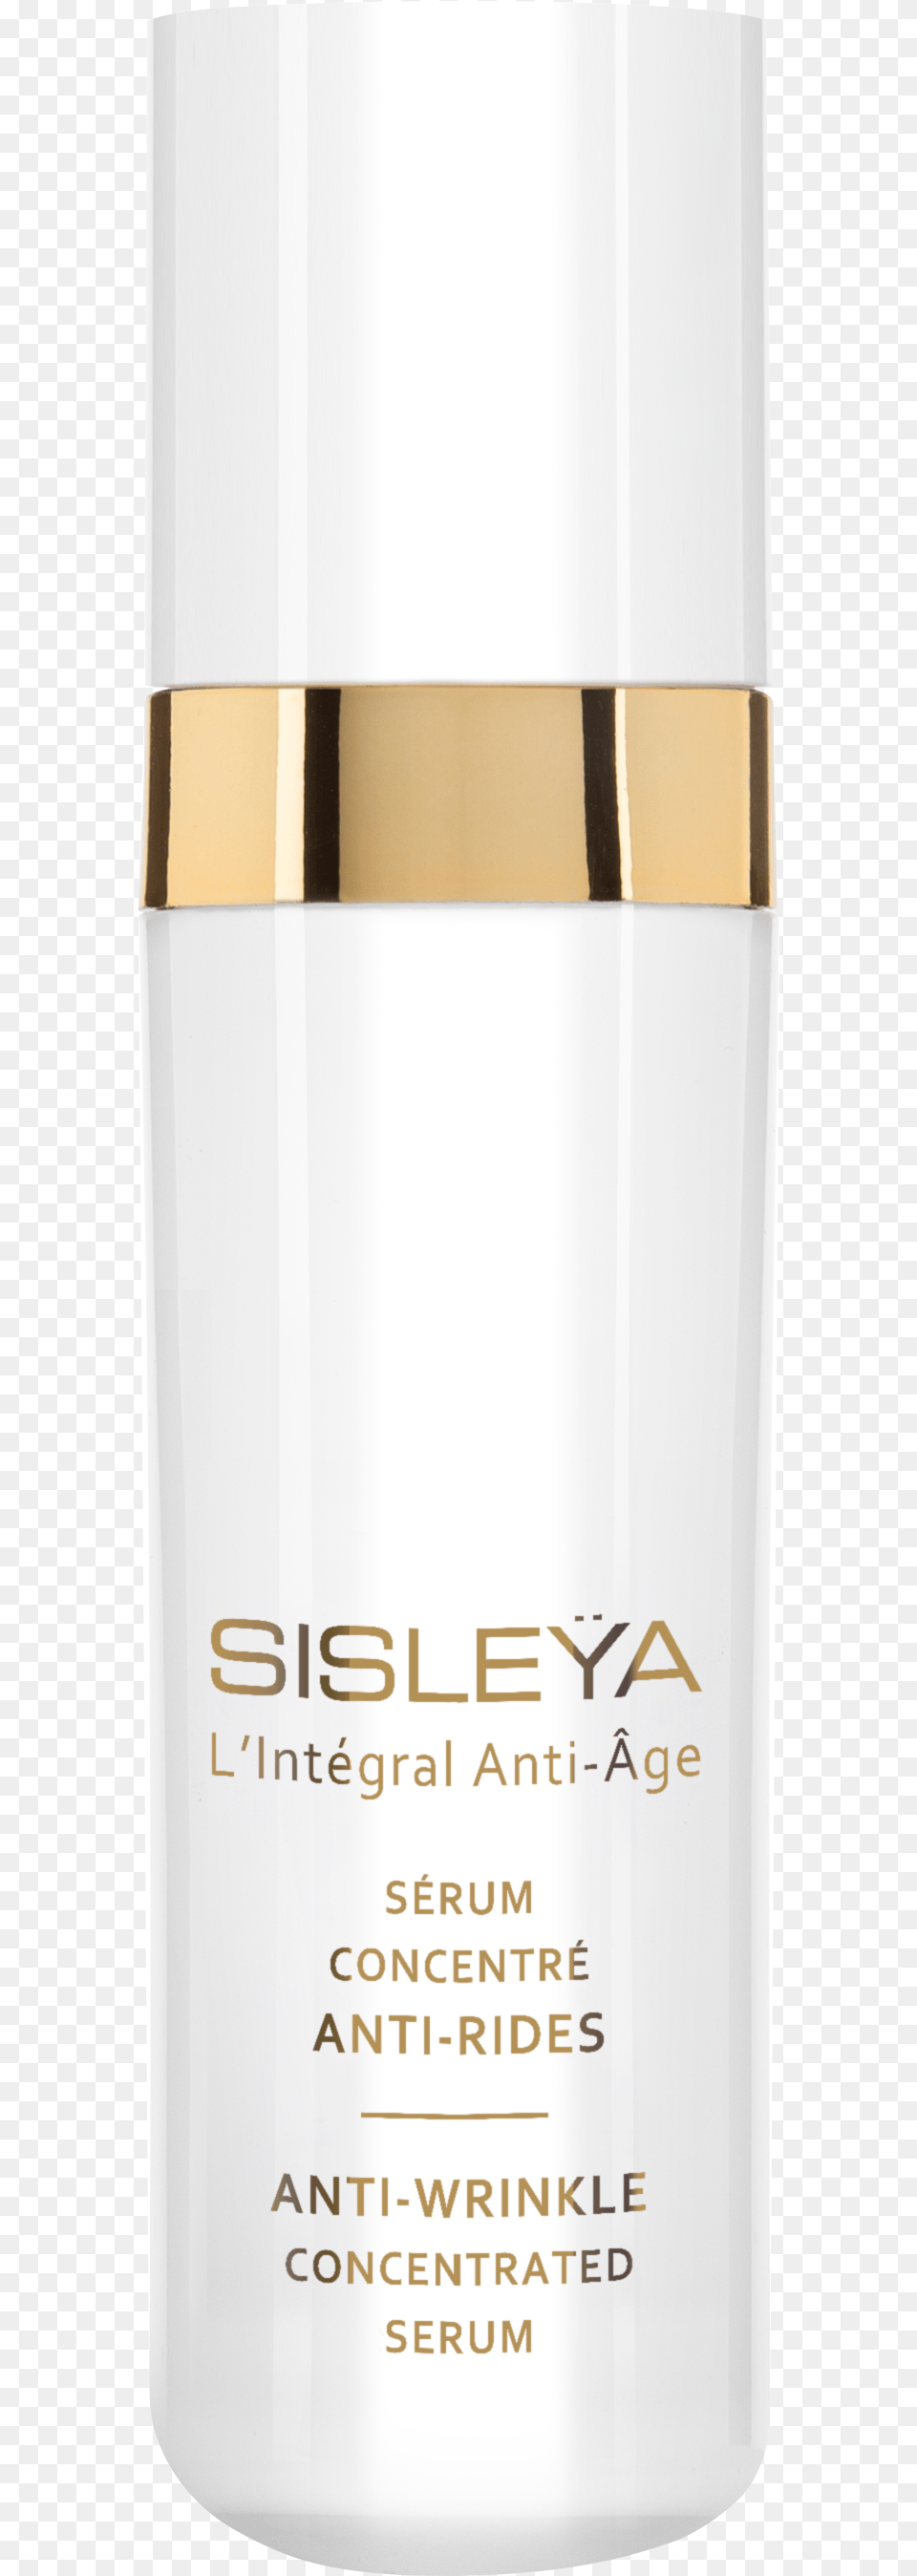 Sislea L39intgral Anti Ge Anti Wrinkle Concentrated, Cosmetics, Bottle, Can, Deodorant Png Image